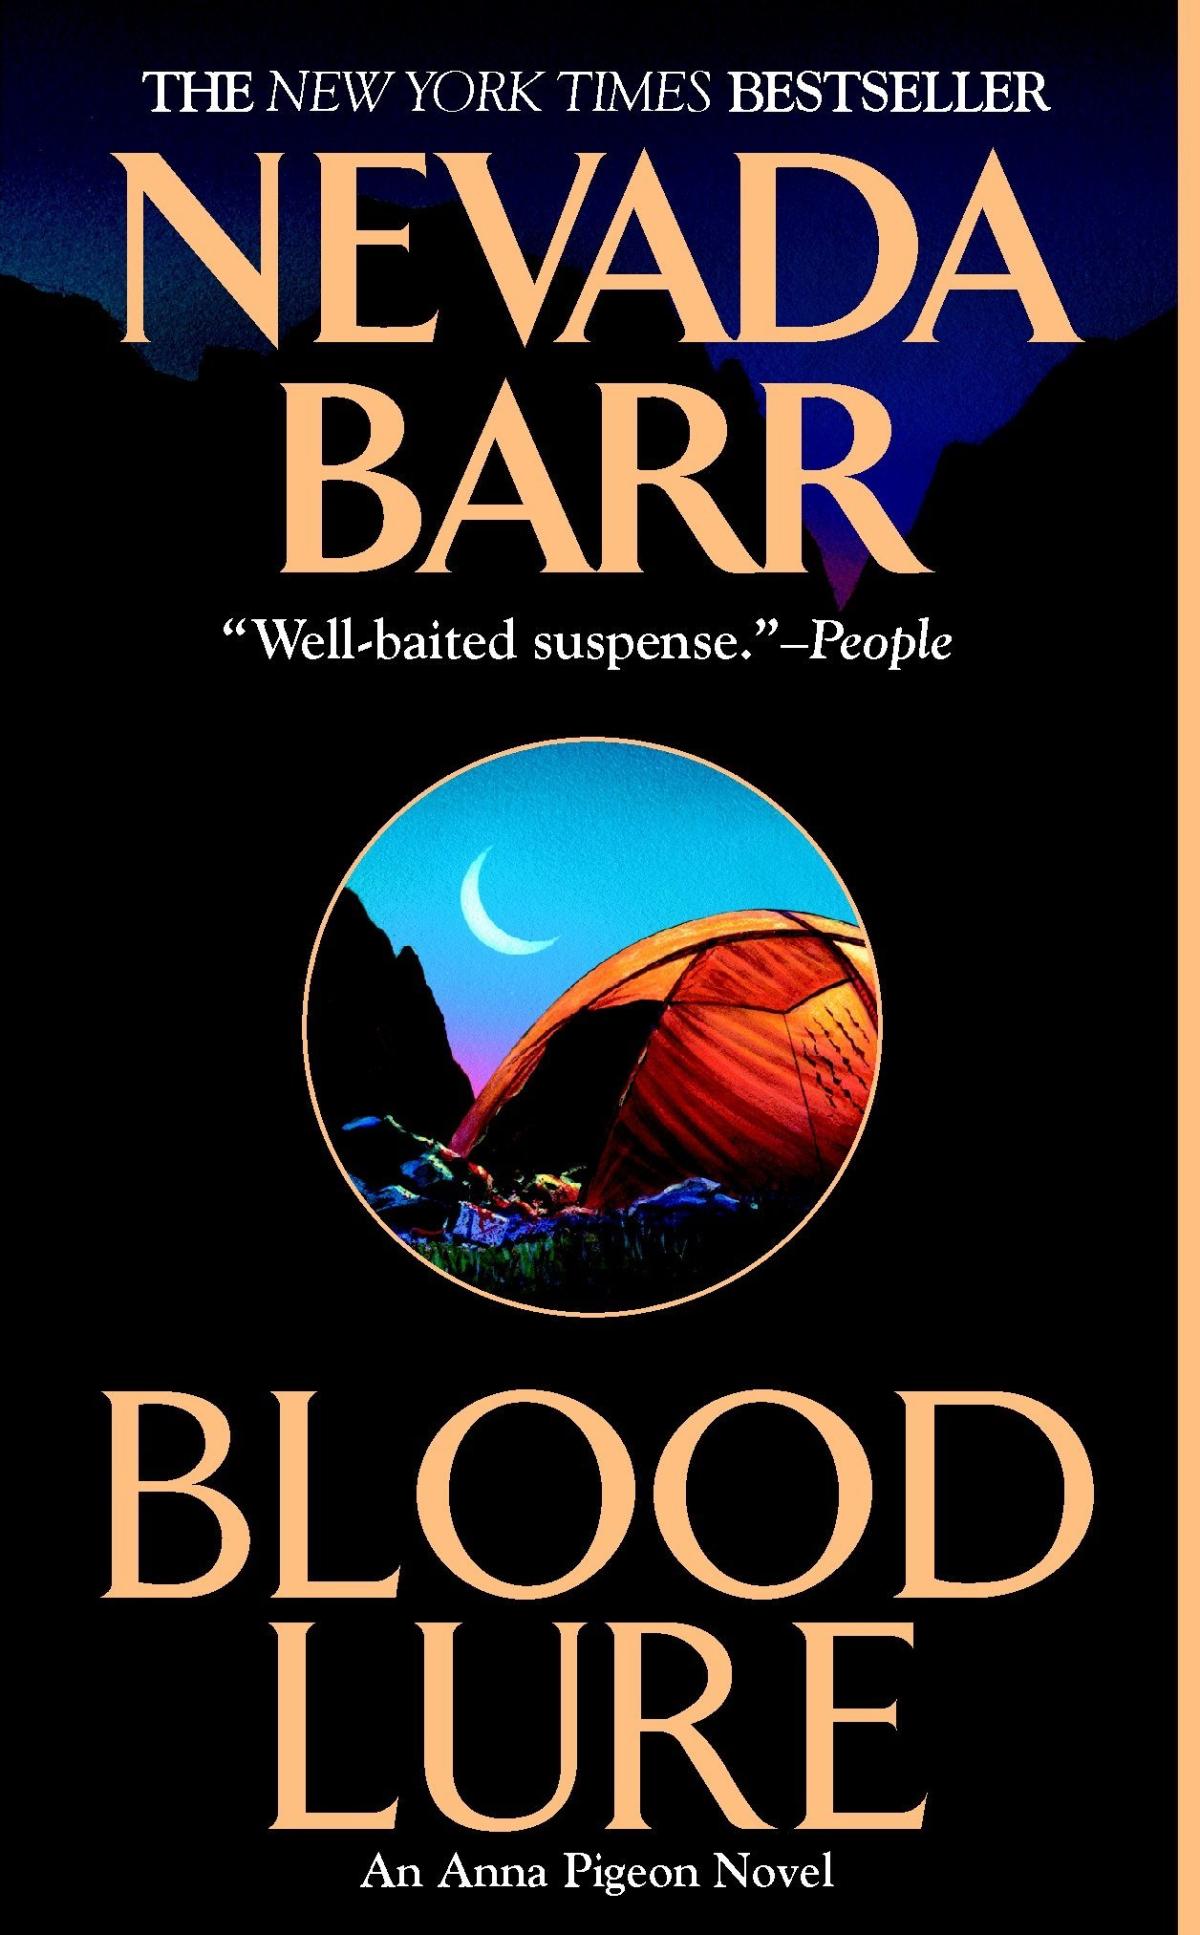 Blood Lure book cover